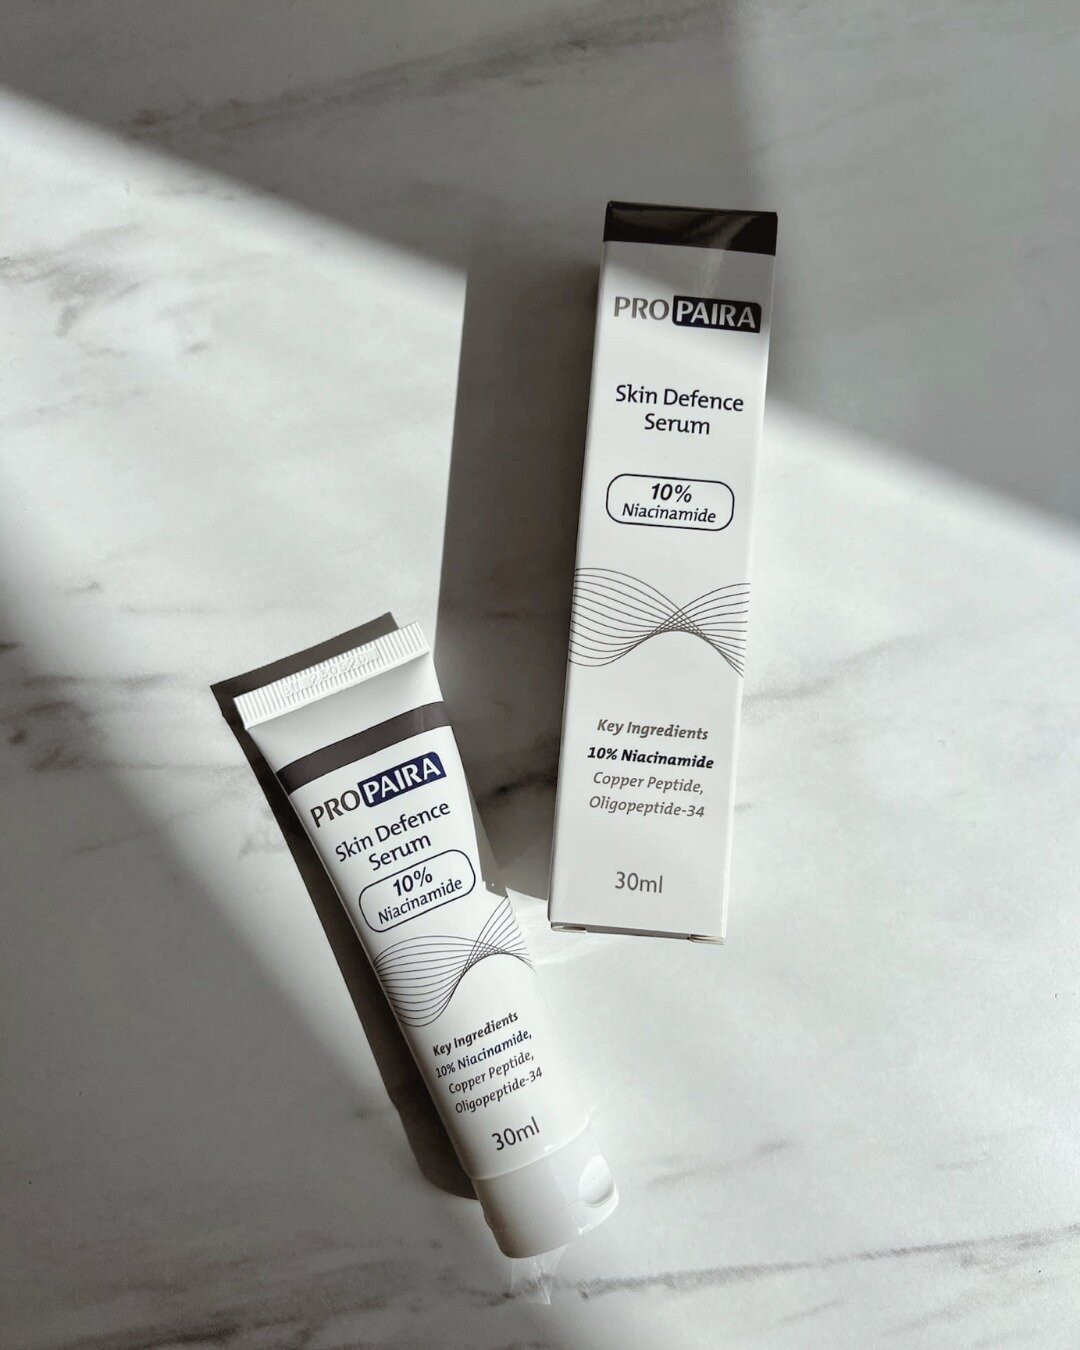 Skin pick of the week:⁠
PROPAIRA 10% Niacinamide Skin Defence Serum:⁠
⁠
A serum designed to target &amp; treat:⁠
Sun damage (photoaging) and sun spots ⁠
Fine lines and wrinkles⁠
Skin thinning⁠
⁠
Due to its high percentage of Niacinamide, we often als